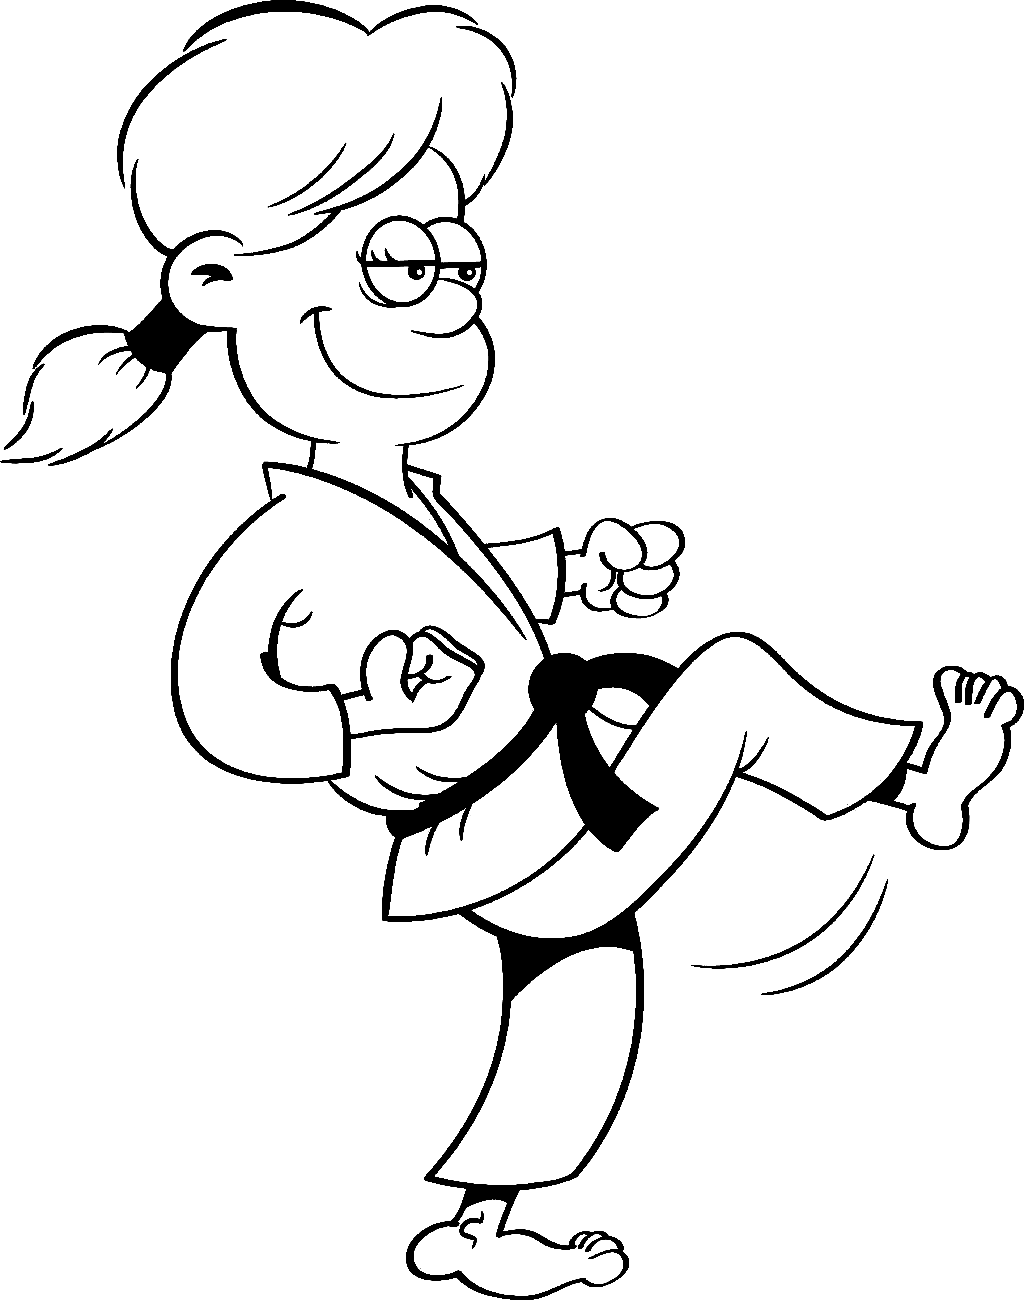 Martial Arts for Kids Coloring Page